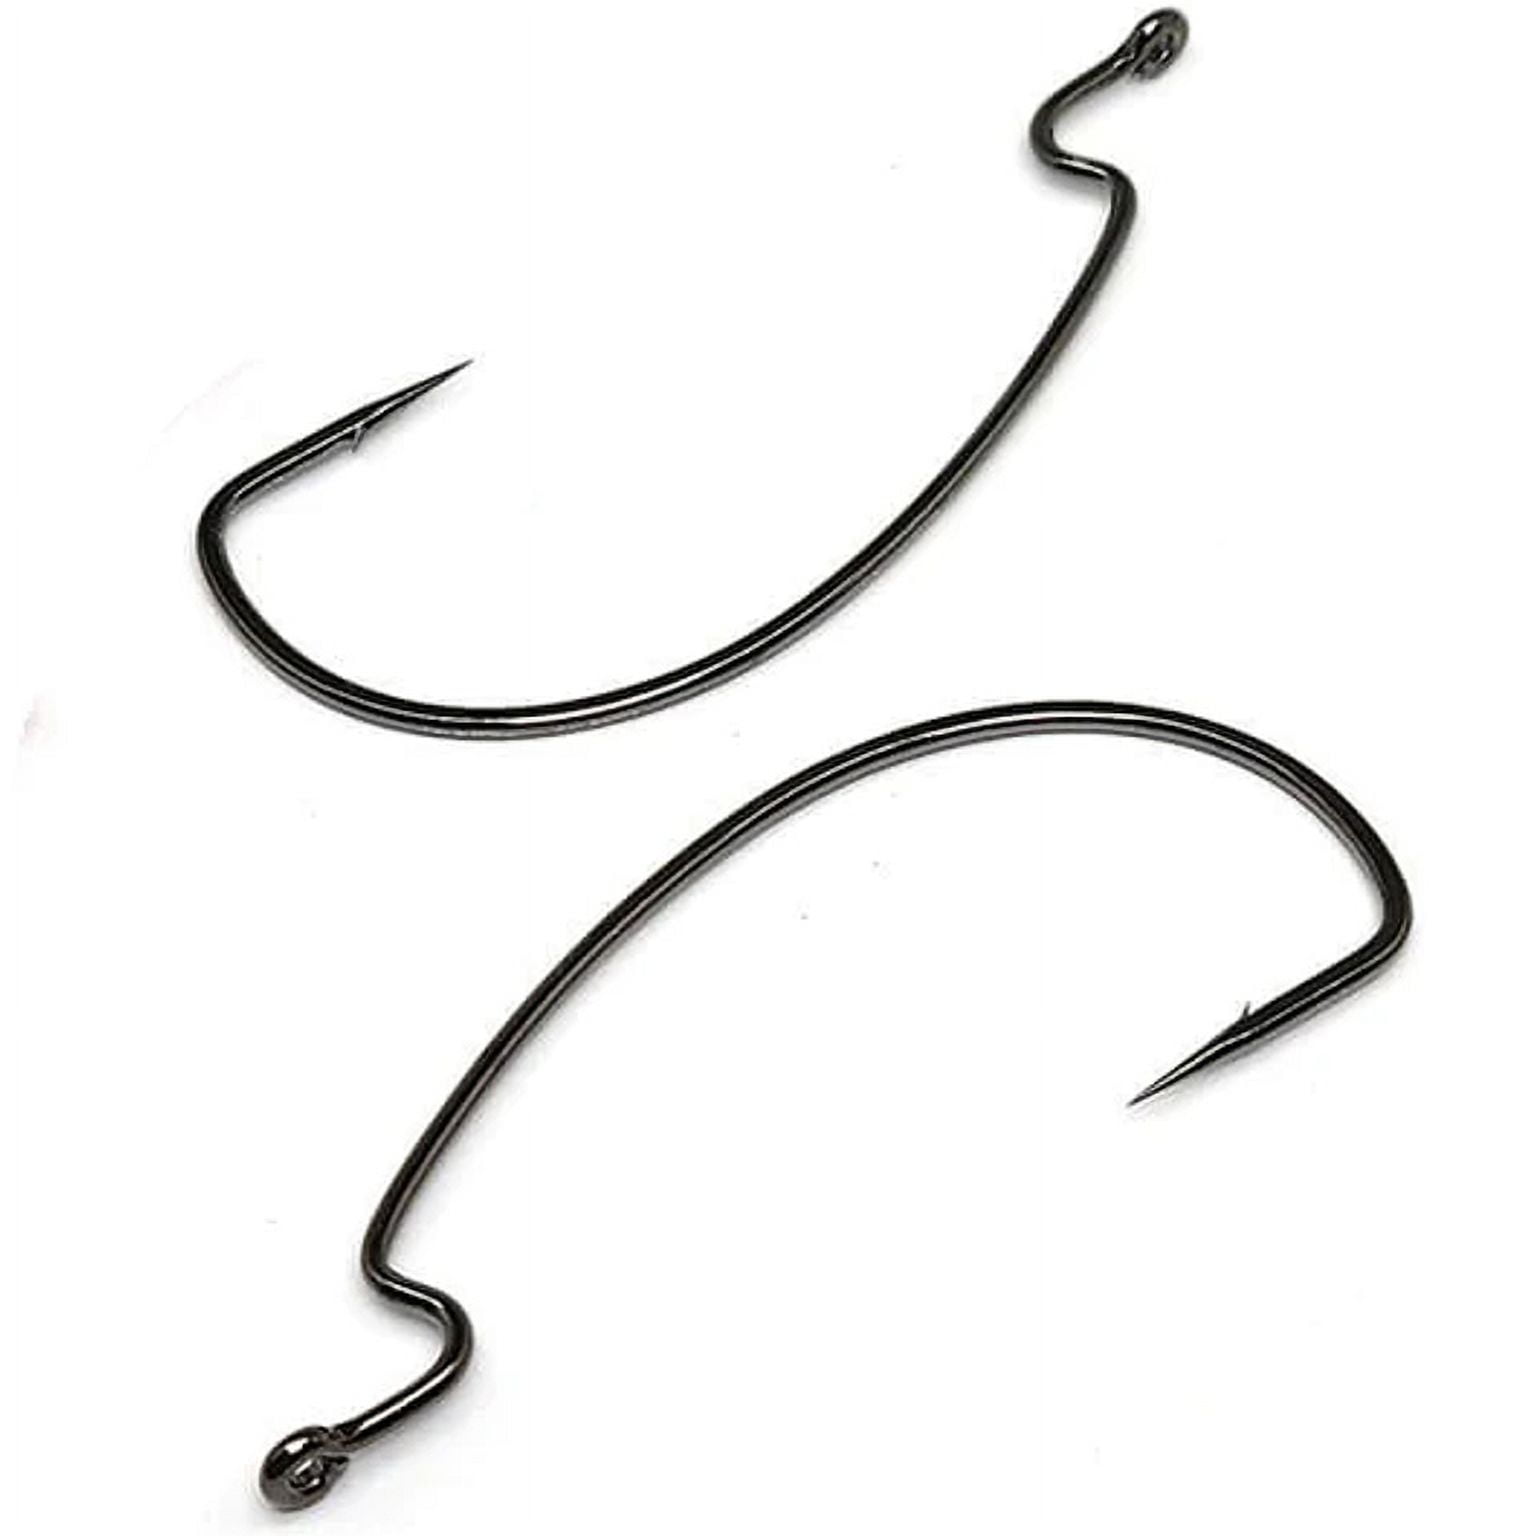 Gamakatsu Worm Offset EWG Hook in High Quality Carbon Steel, Size 1/0, NS  Black, 6-Pack 